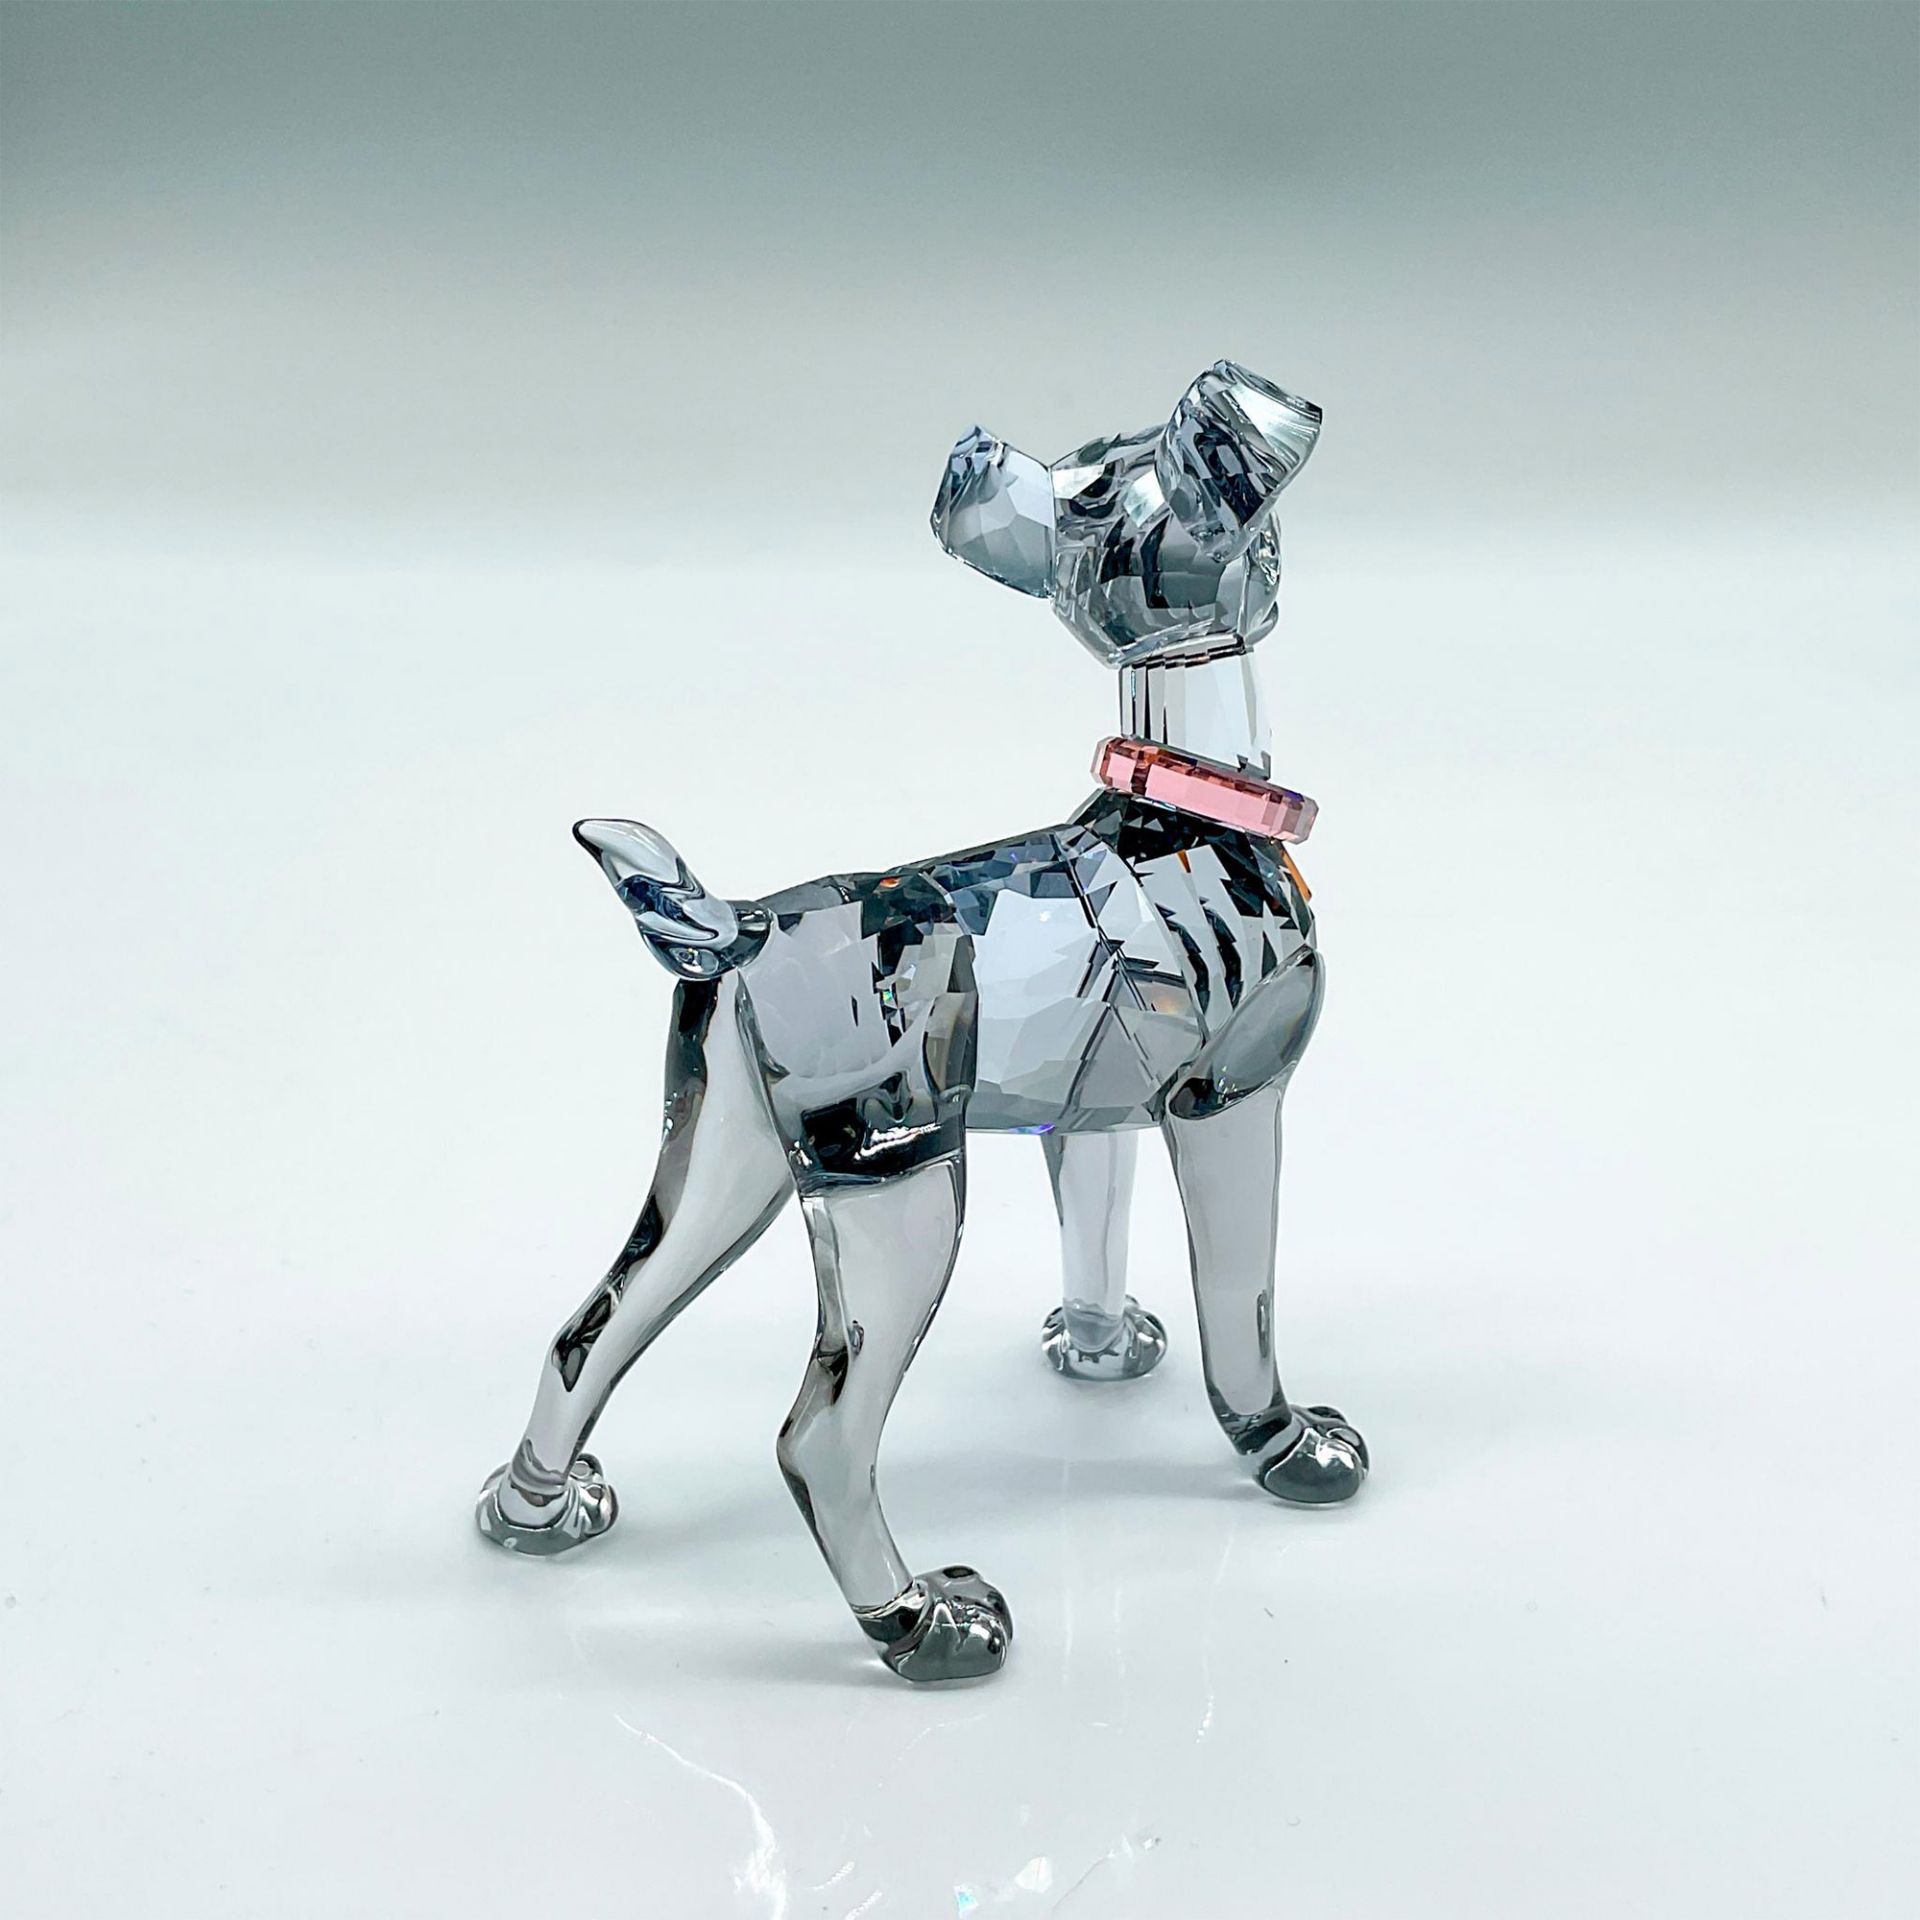 Swarovski Crystal Figurine, Tramp from Lady and the Tramp - Image 2 of 4